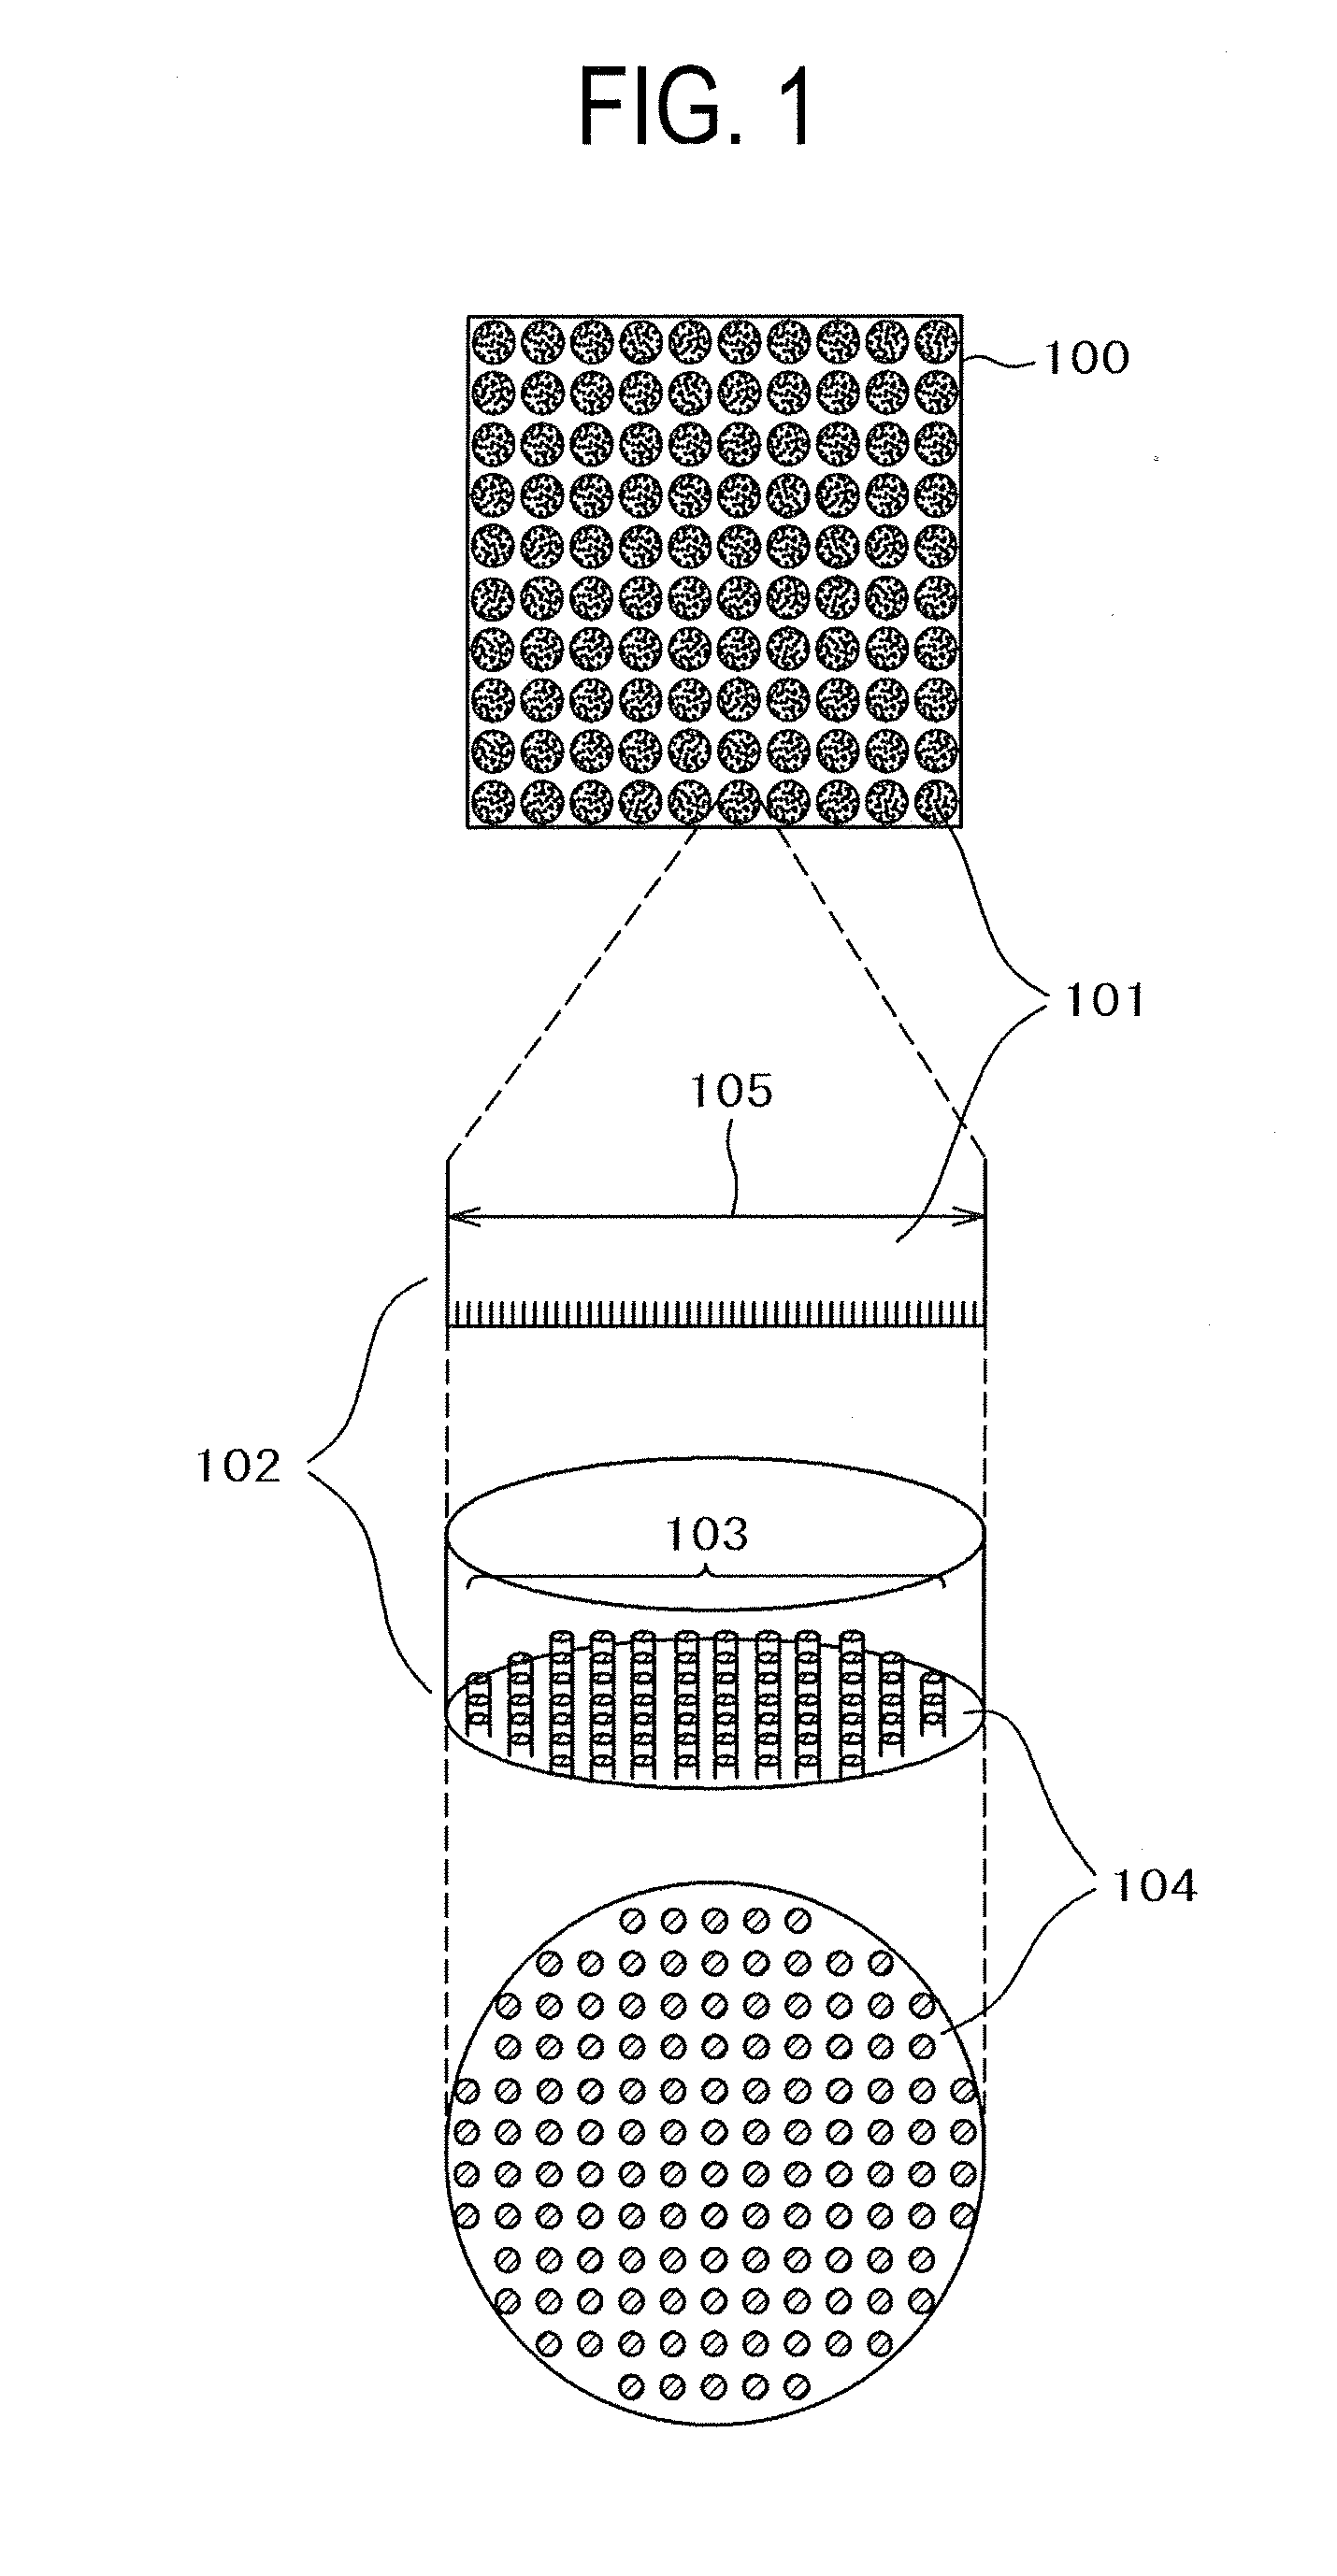 Culture substrate, culture sheet, and cell culture method